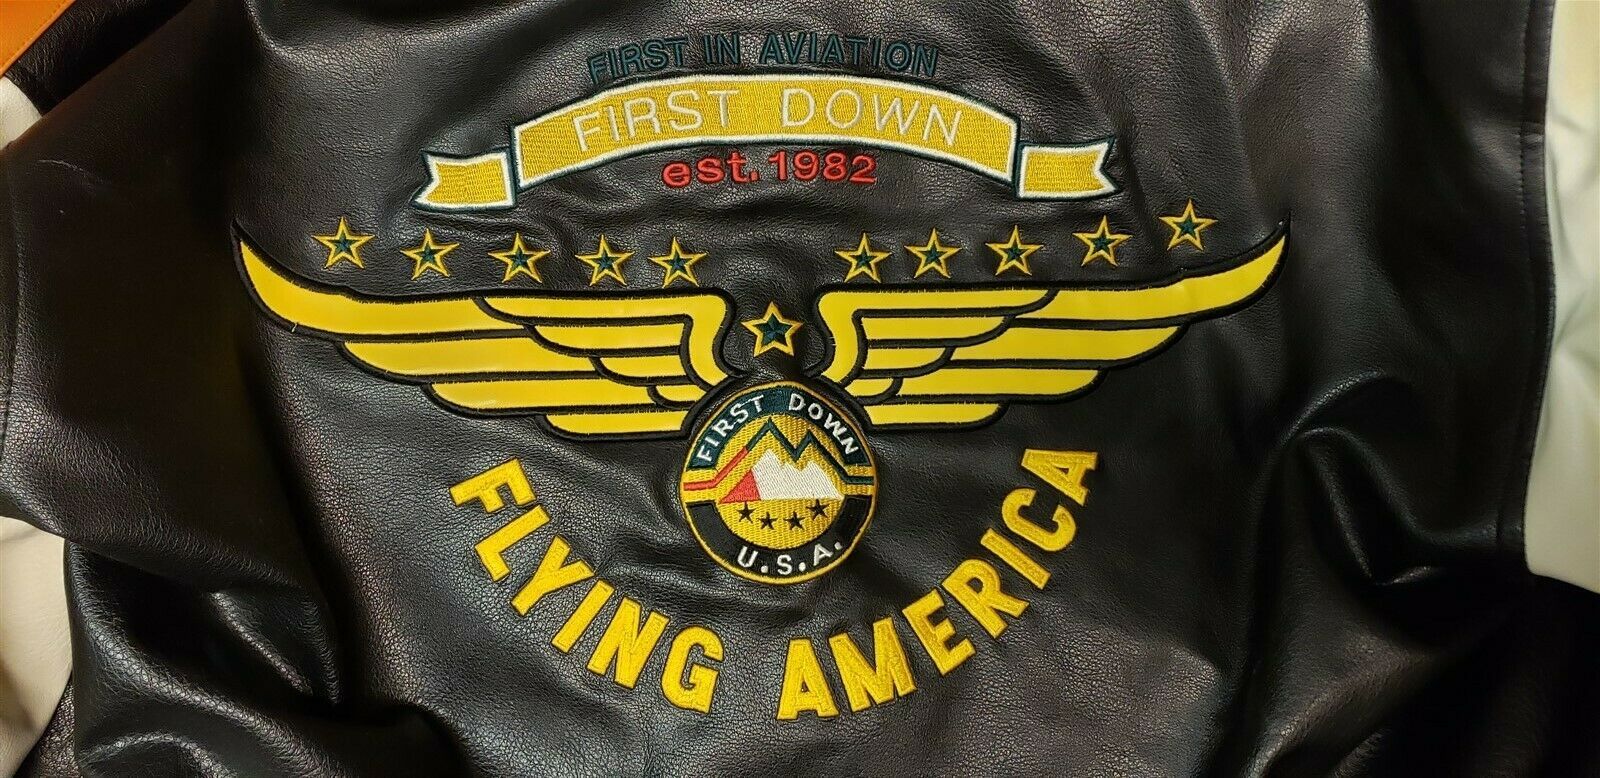 First Down Aviation Fighting Eagle Jacket PVC Casting Leather XX Large Coat - $179.99